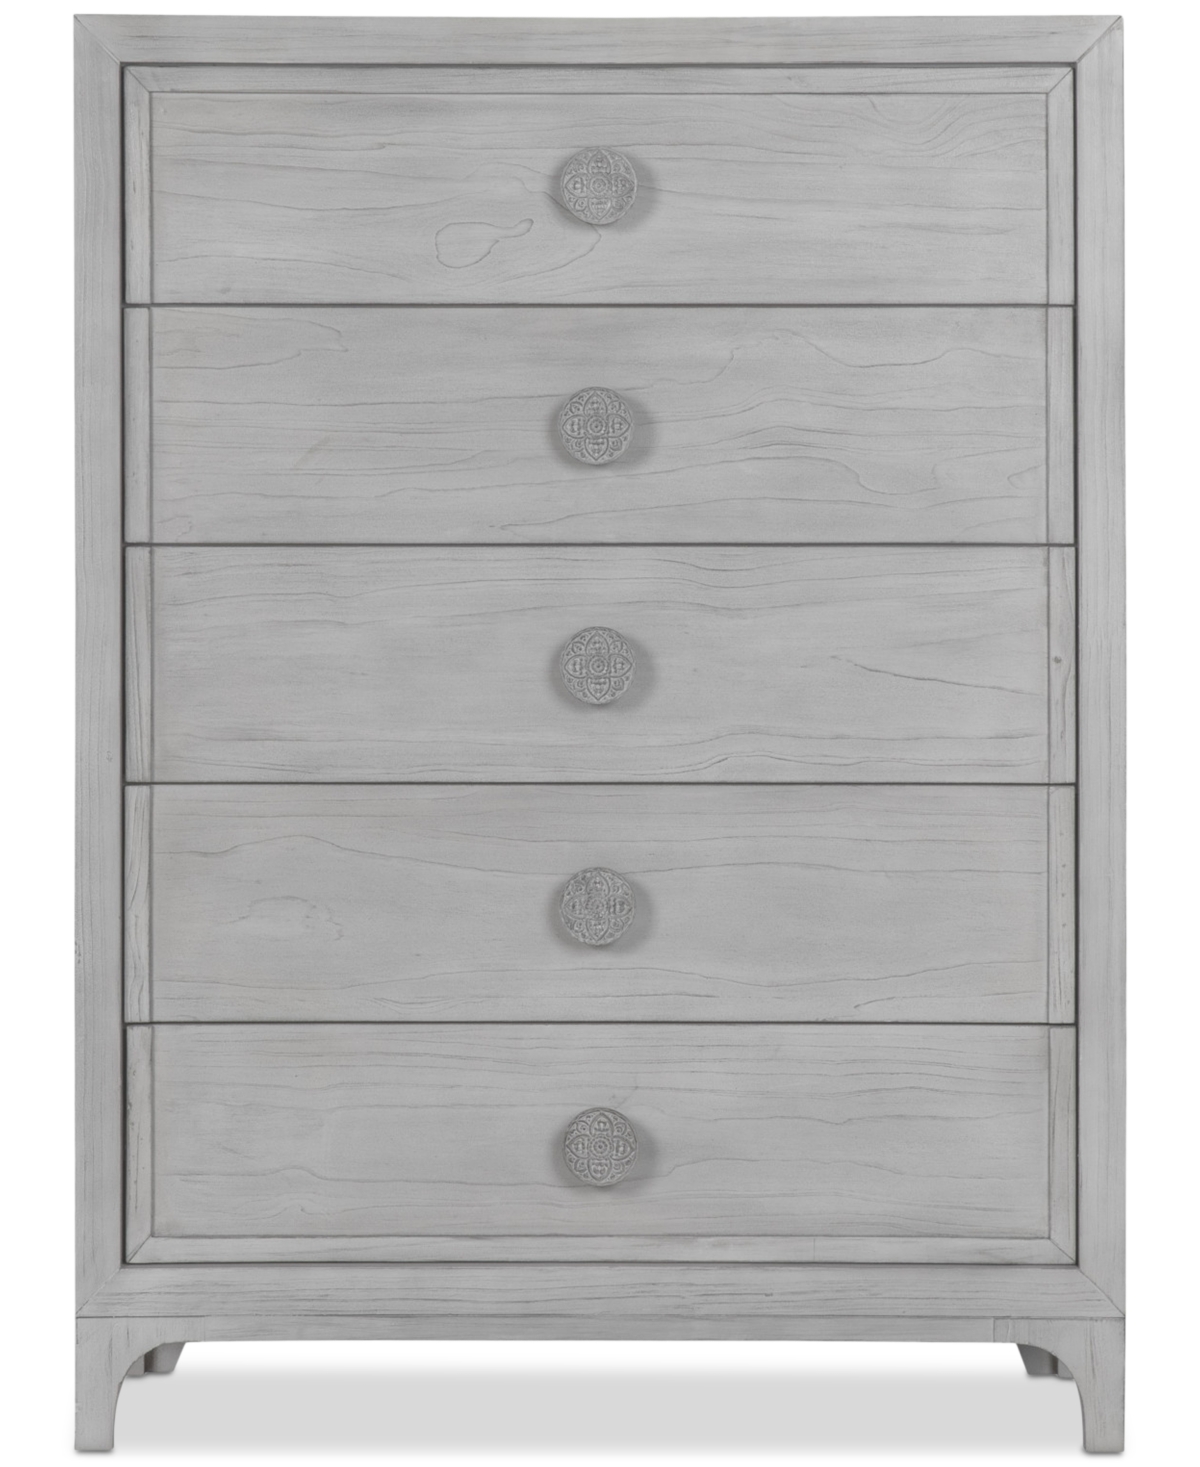 Furniture Boho Chic Chest In Washed Wht